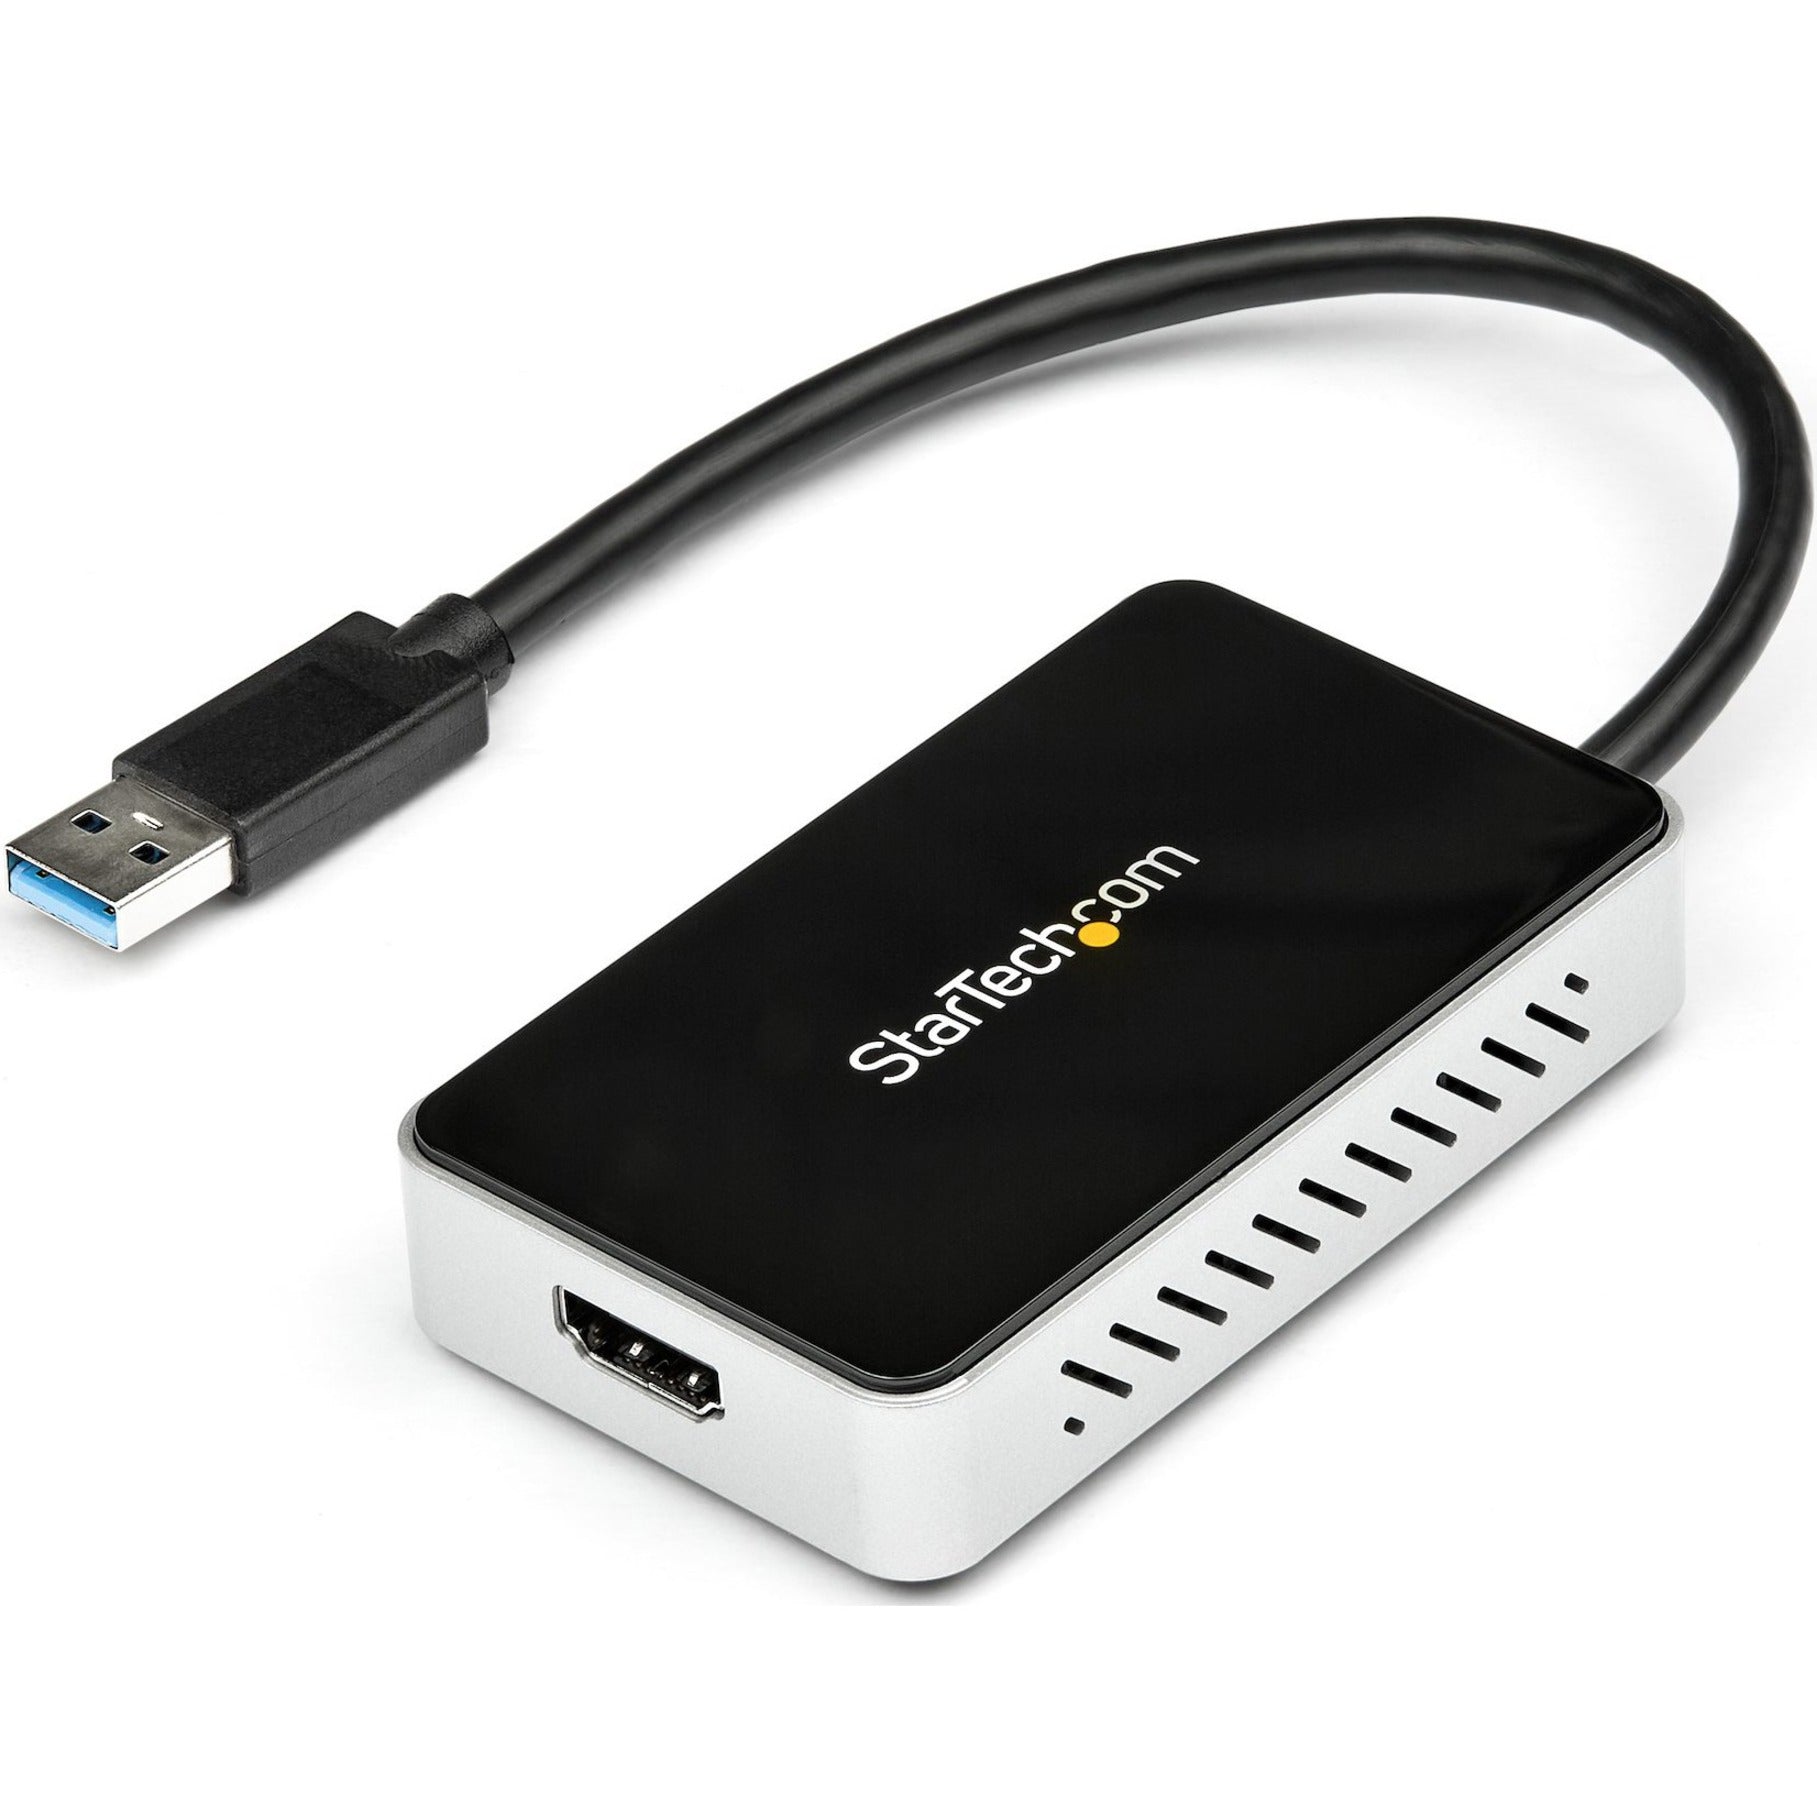 StarTech.com USB32HDEH USB 3.0 to HDMI Adapter, Multi Monitor Video Card with 1-Port USB Hub